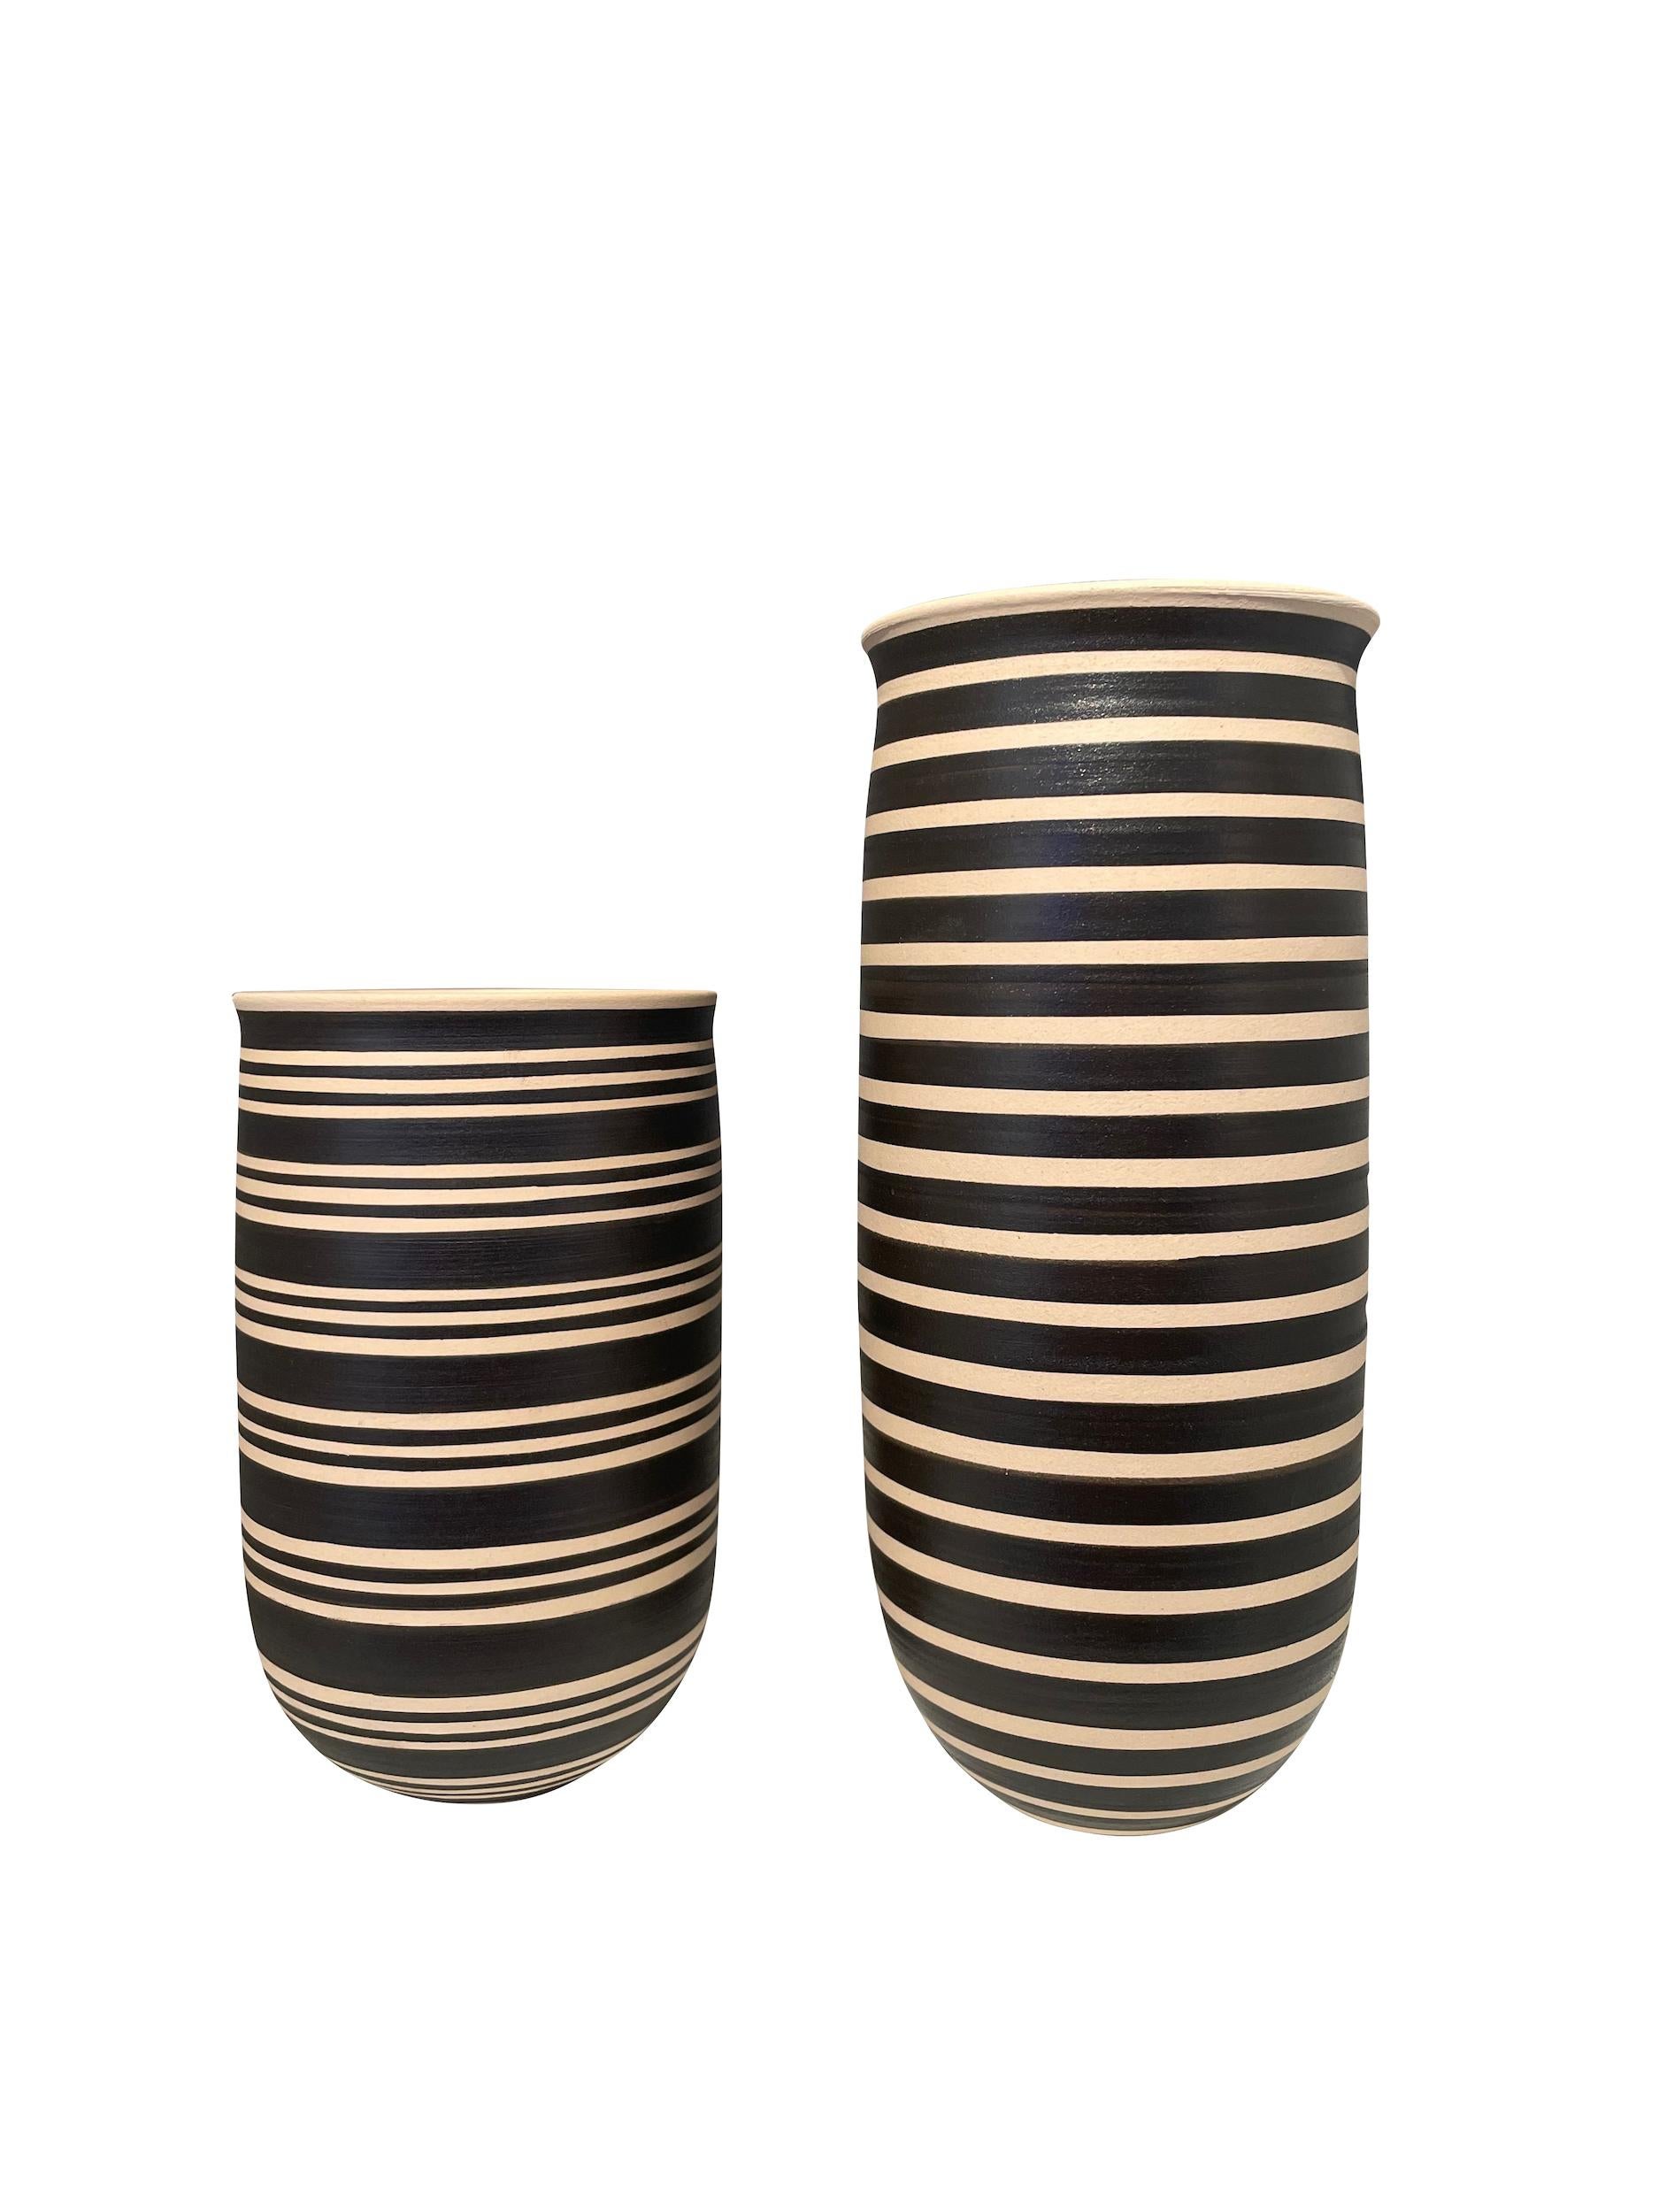 Ceramic Black And Cream Triple Band Stripe Wide Opening Vase, Turkey, Contemporary For Sale